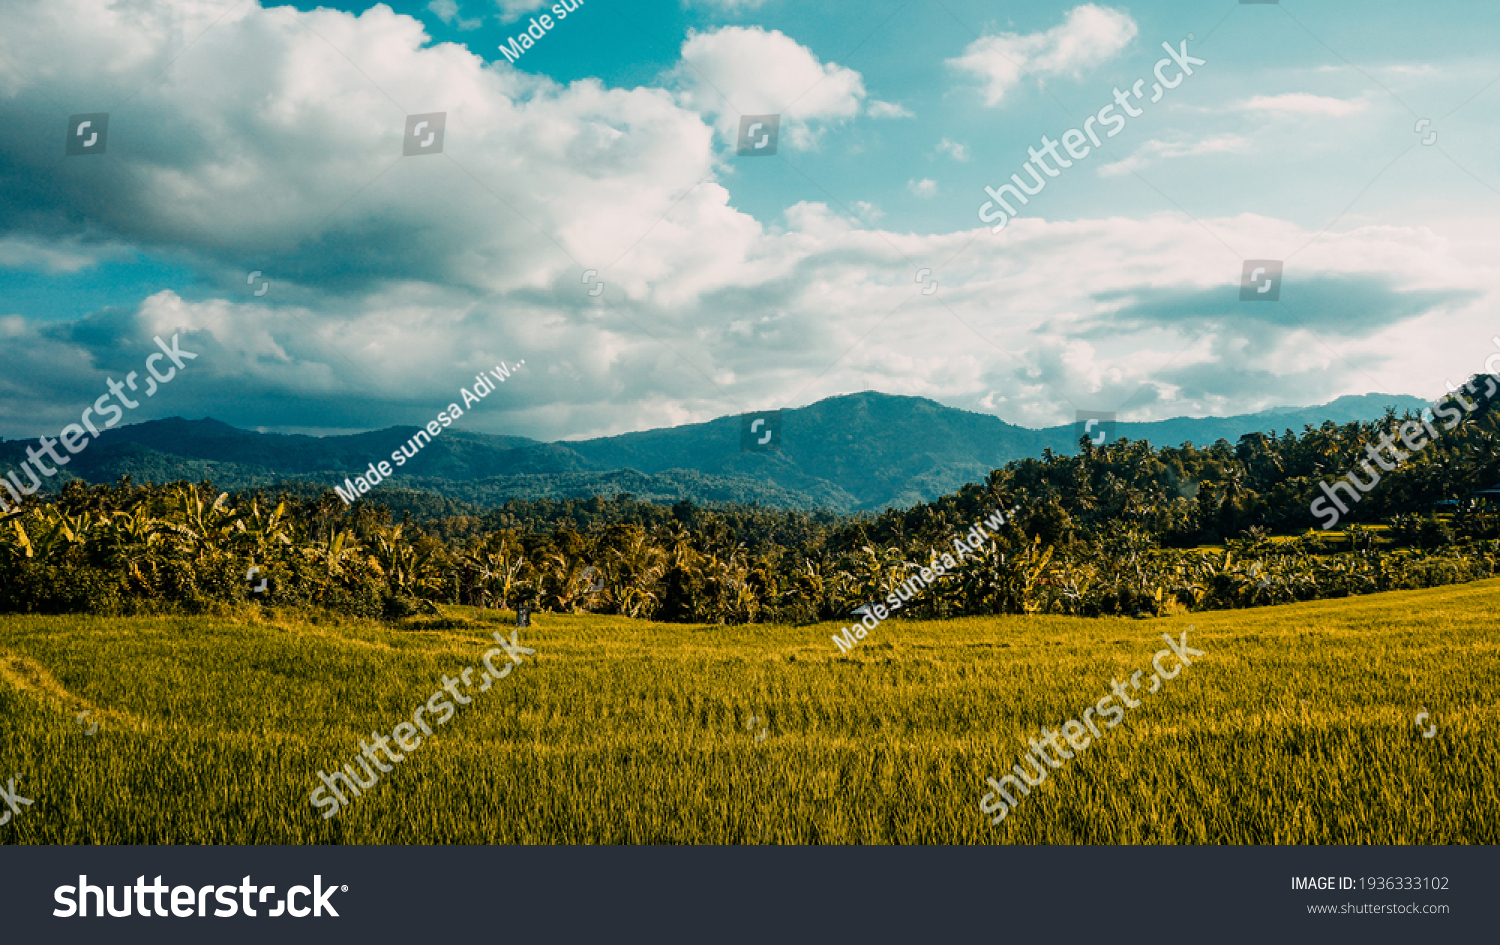 Tropical rural landscape with beautiful rice fields and mountains #1936333102